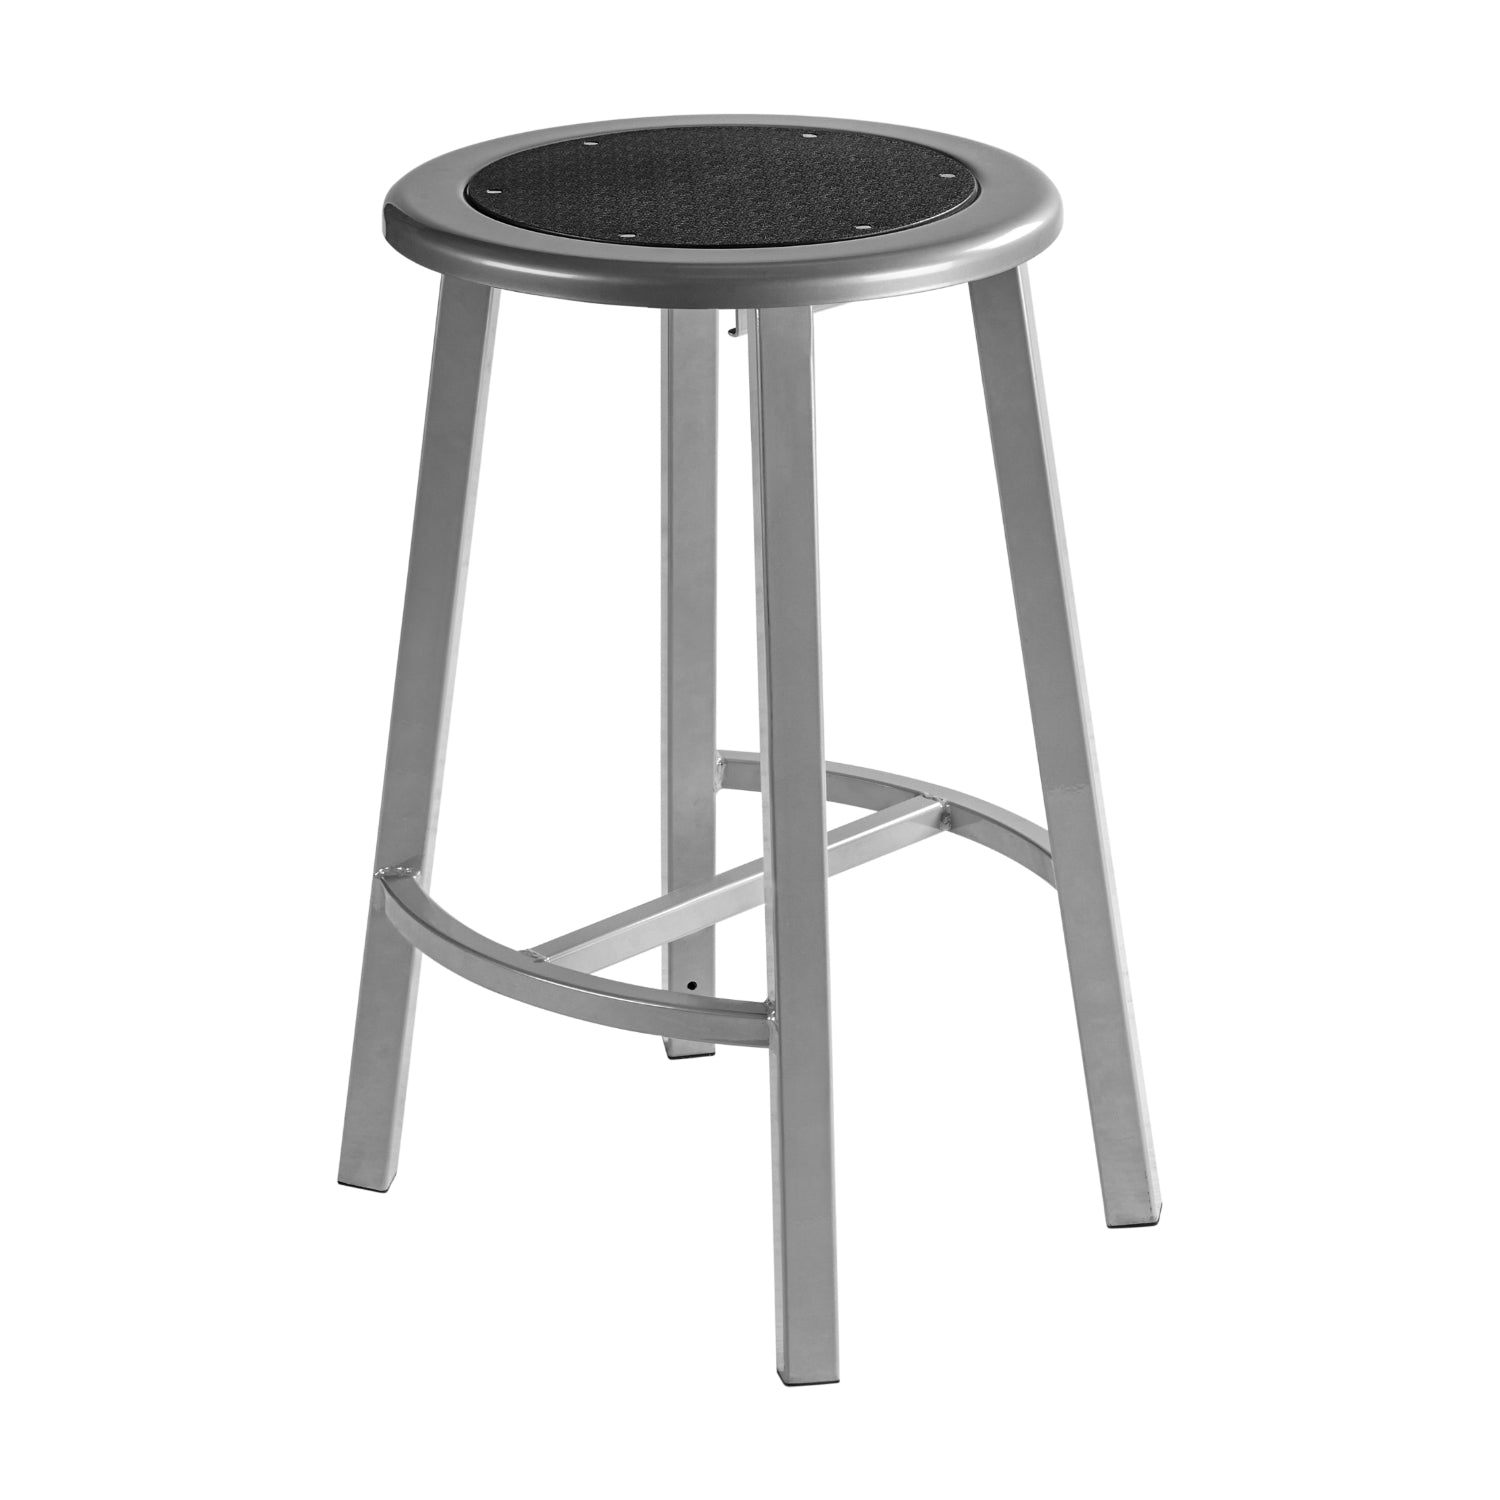 Titan Stool, Steel Seat with Black Poly Center, 24" H